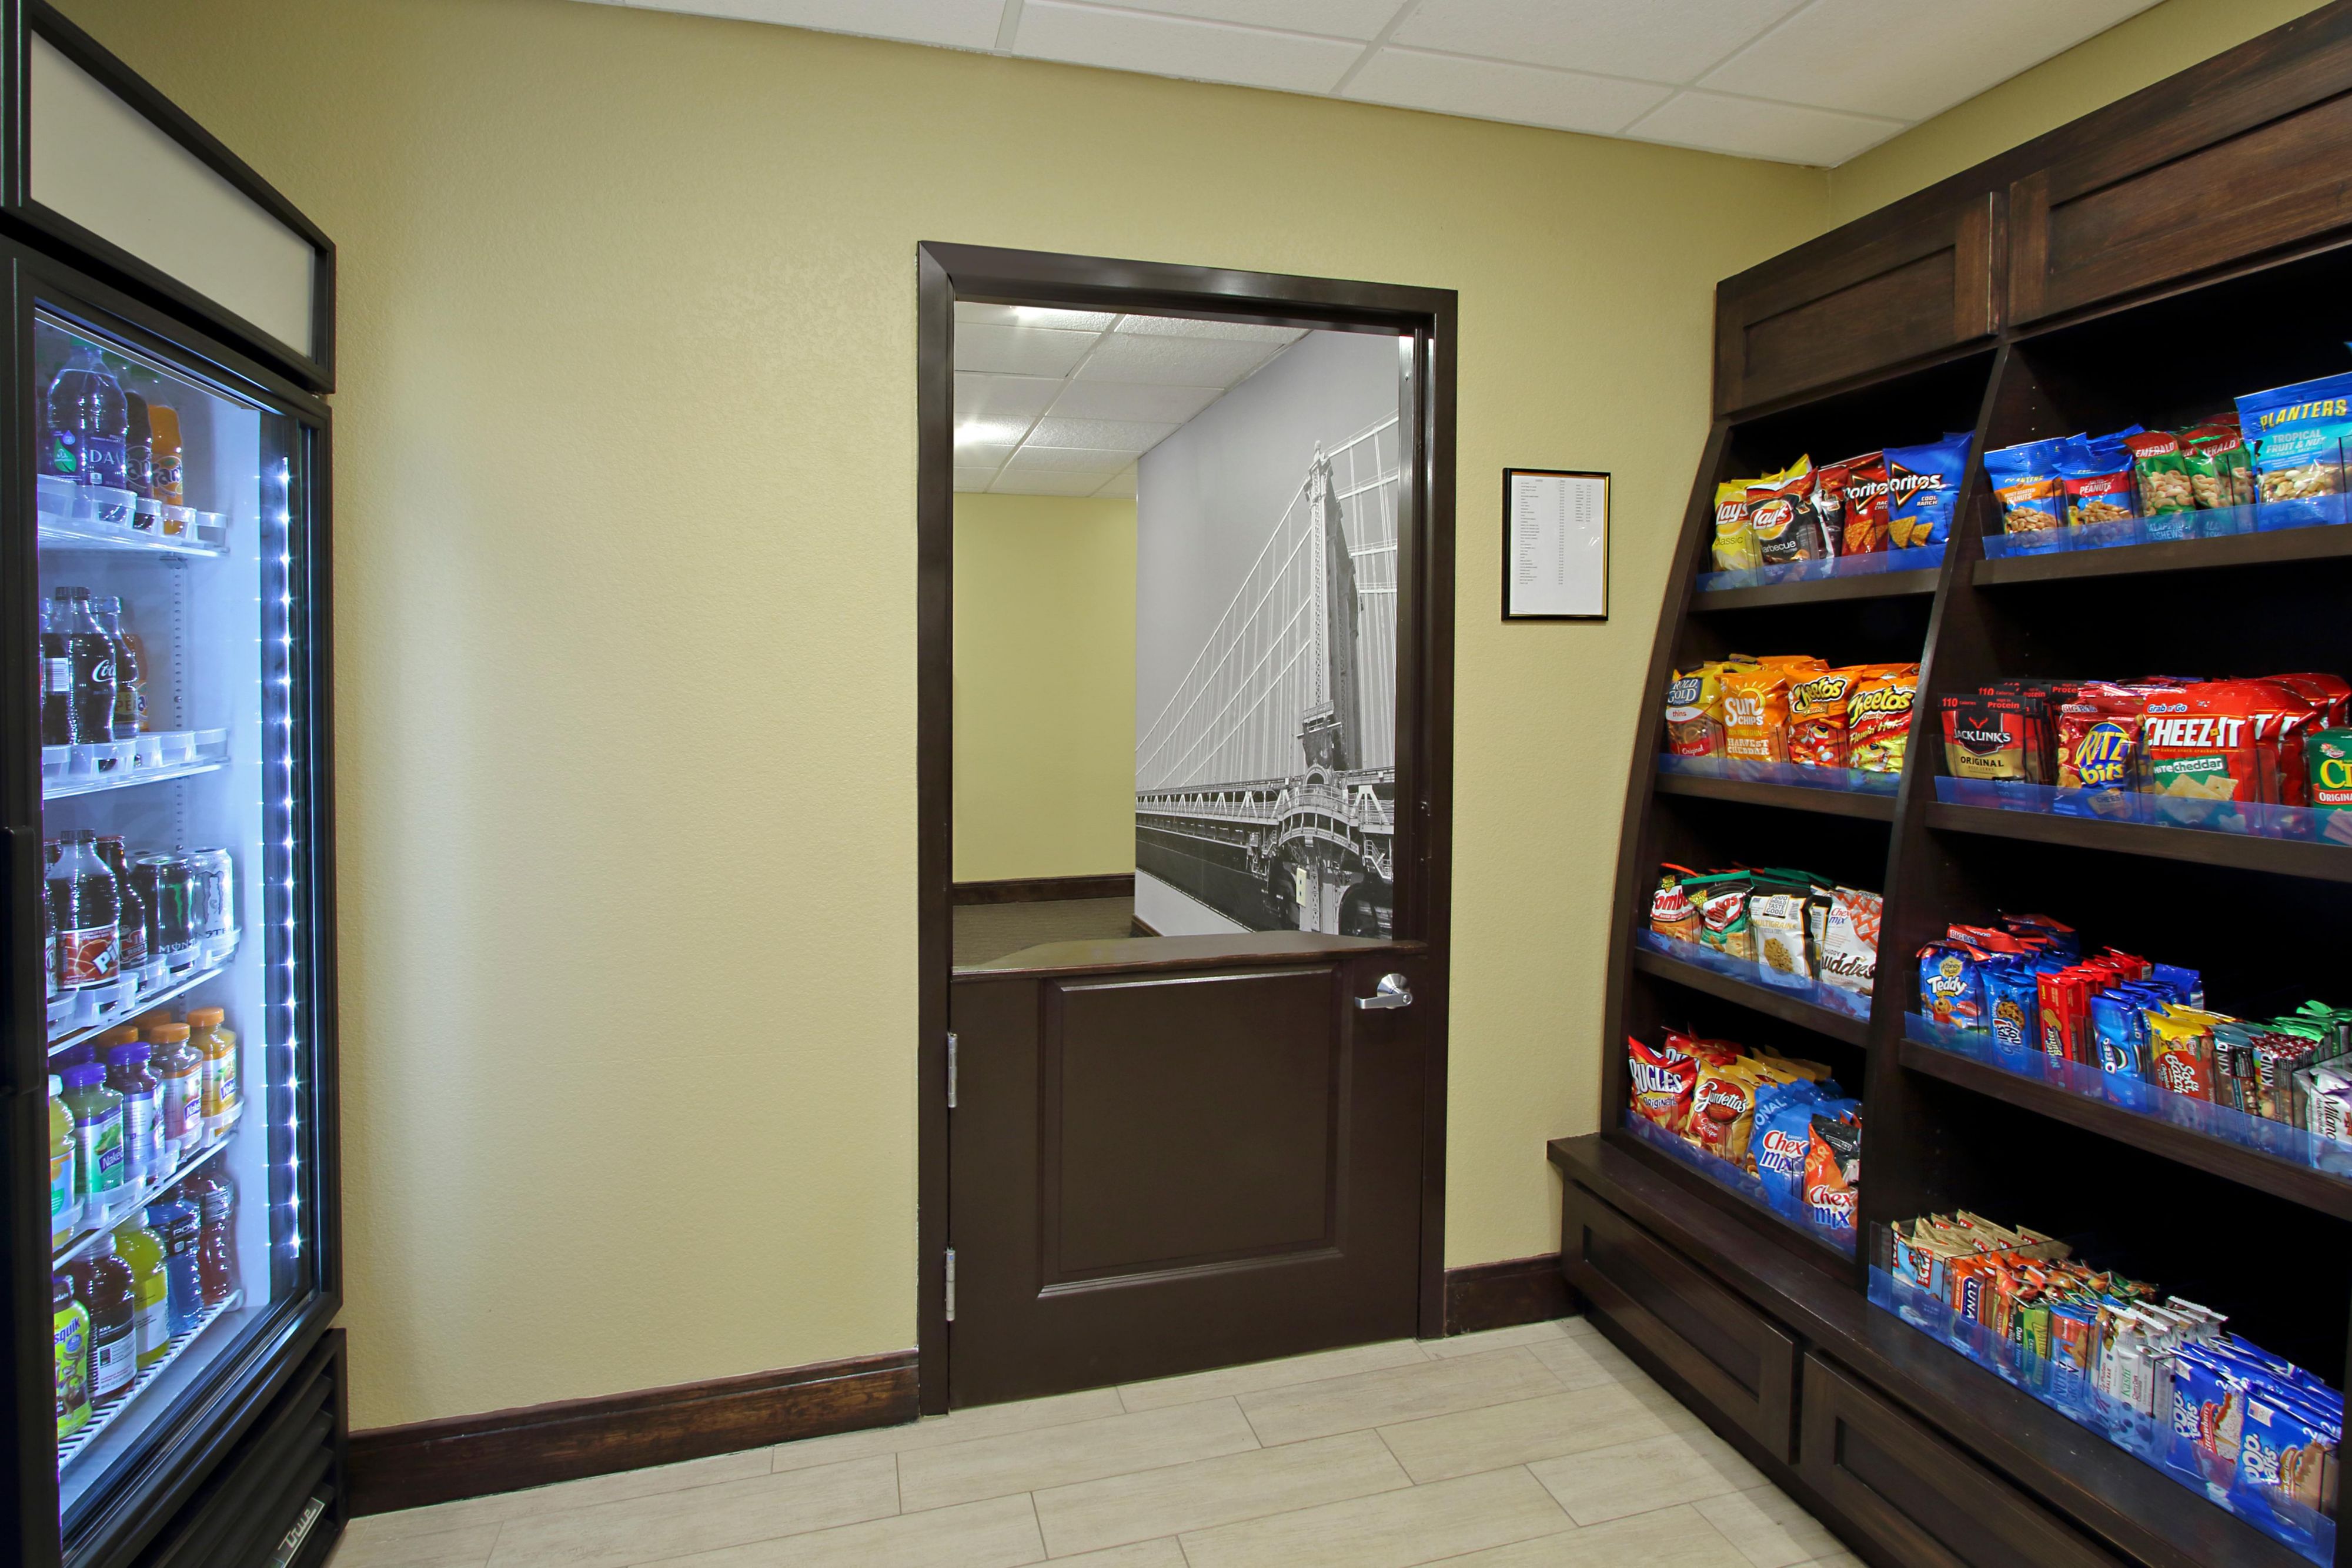 The Pantry is our 24/7 convenience store with snacks, beverages, easy-to-prepare meals, toiletries and anything else you may have forgotten to pack.